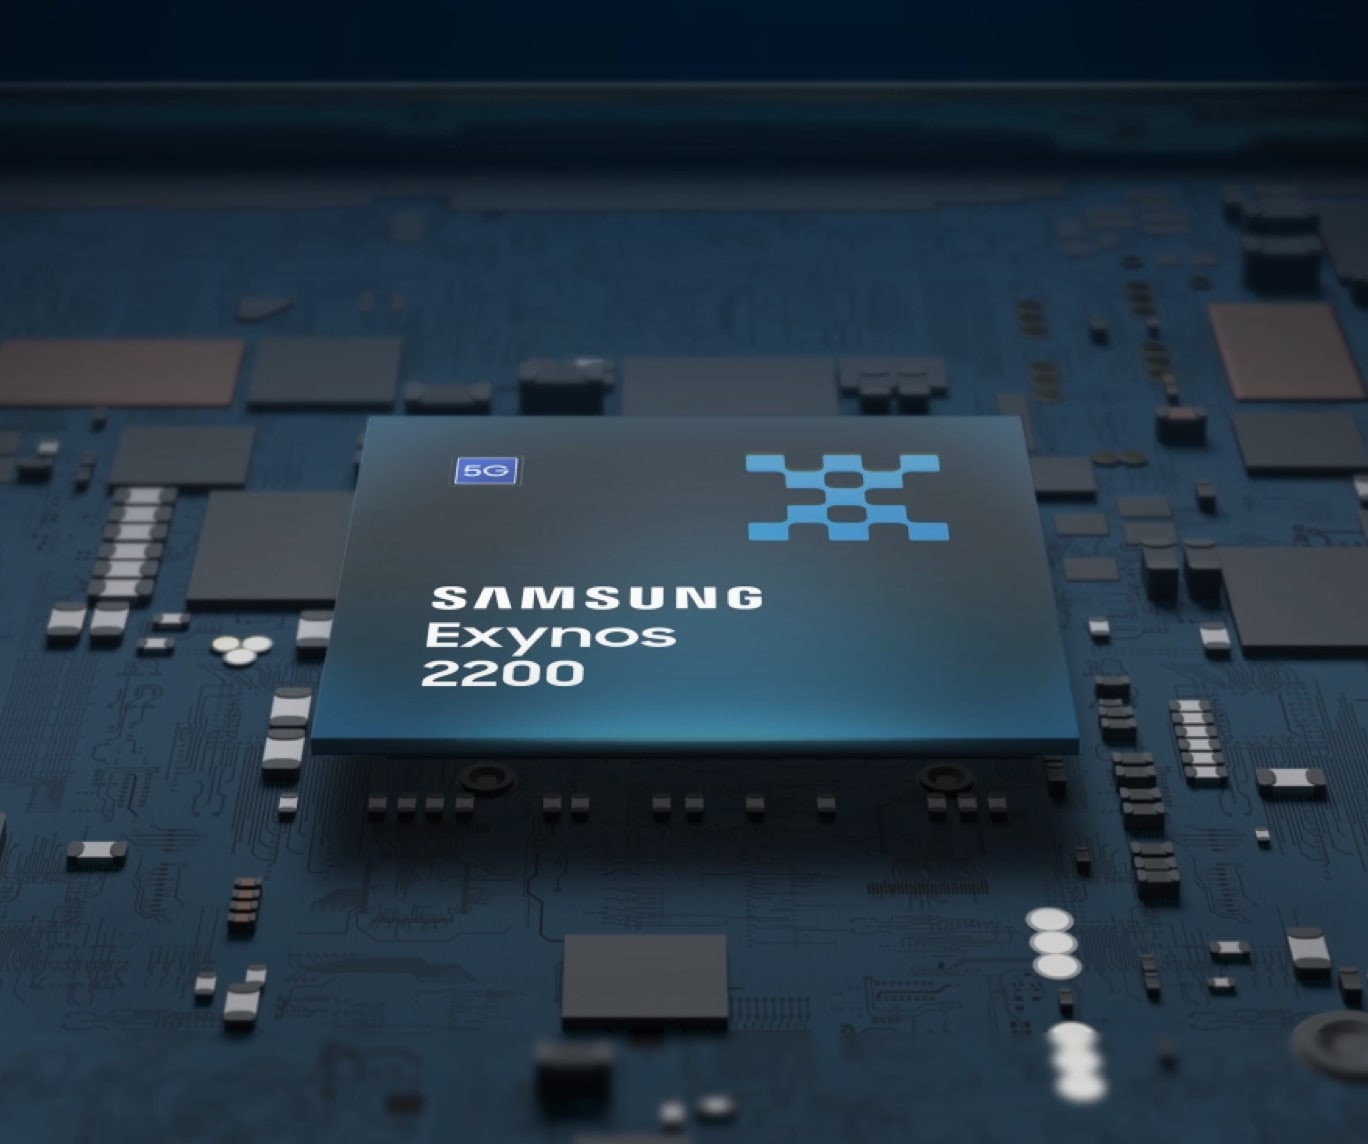 This is the image of Samsung Exynos 2200.